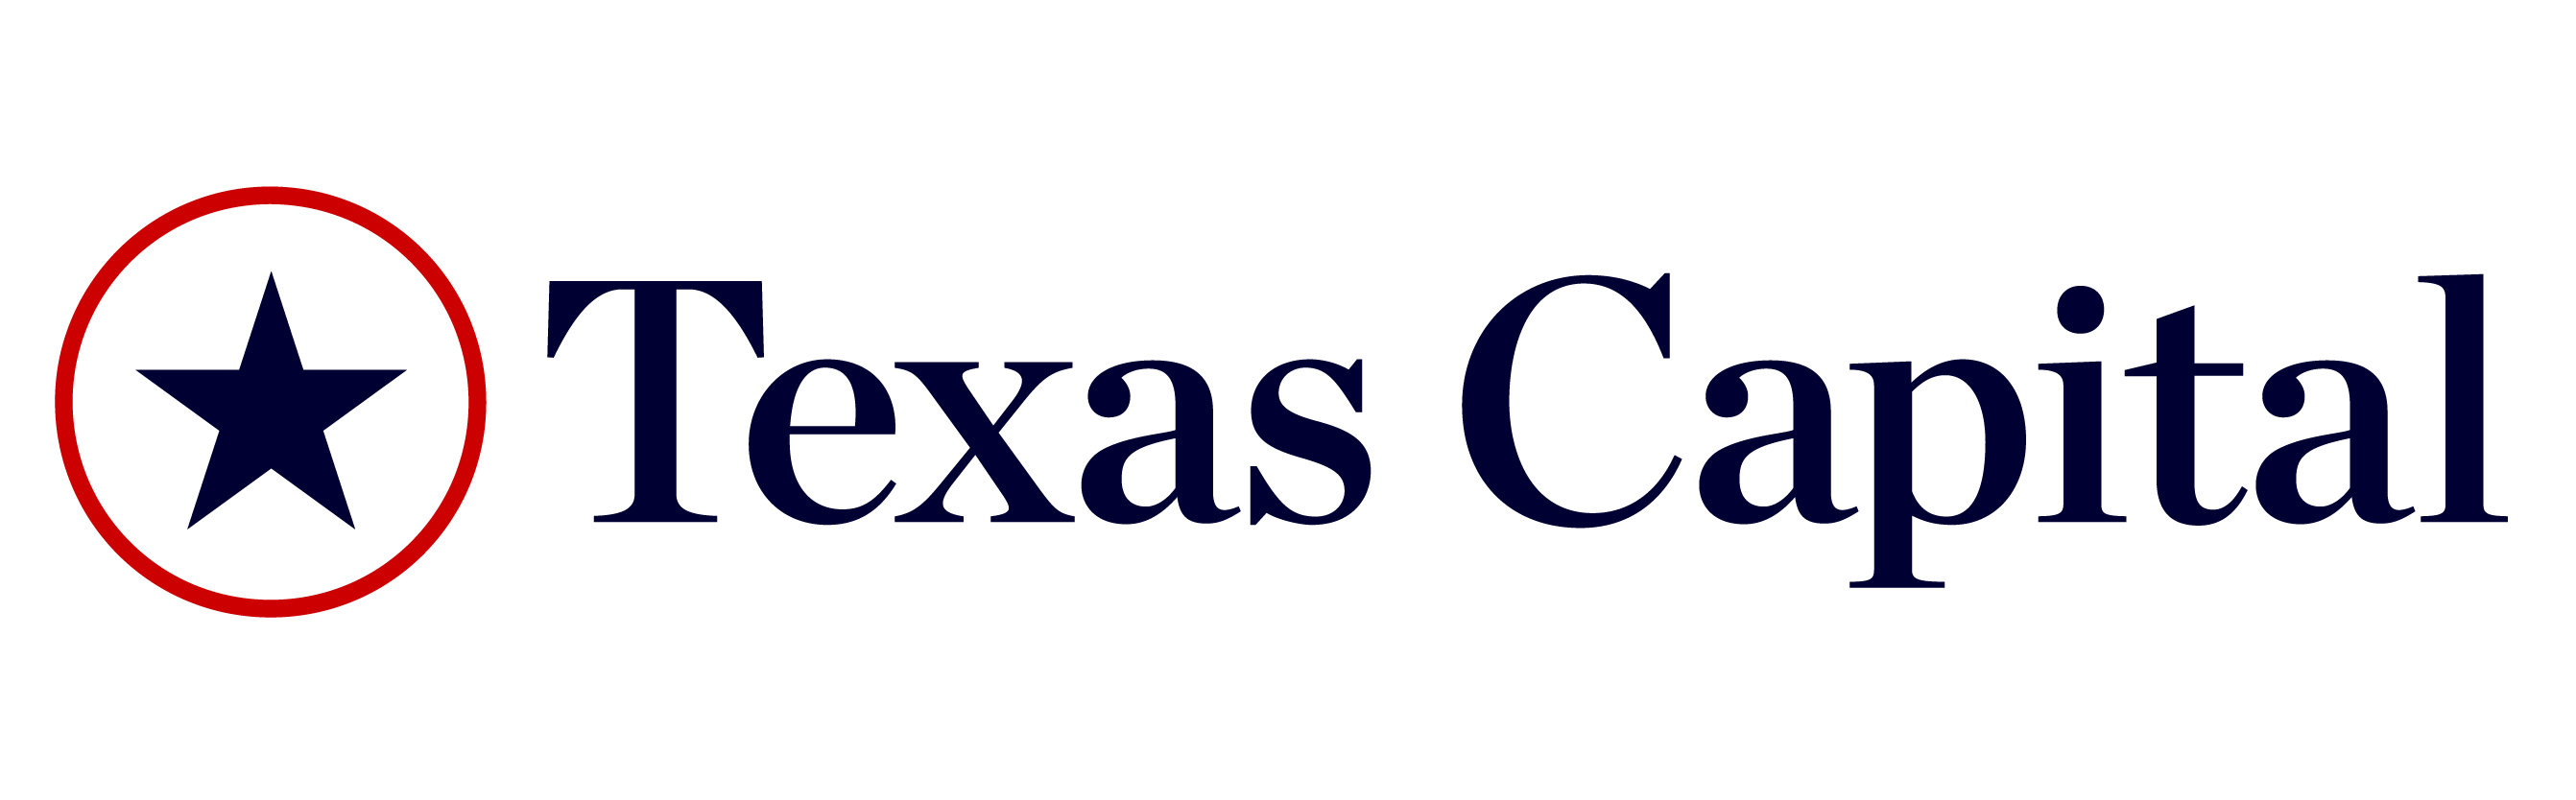 Texas Capital Launches Innovative Onboarding Technology